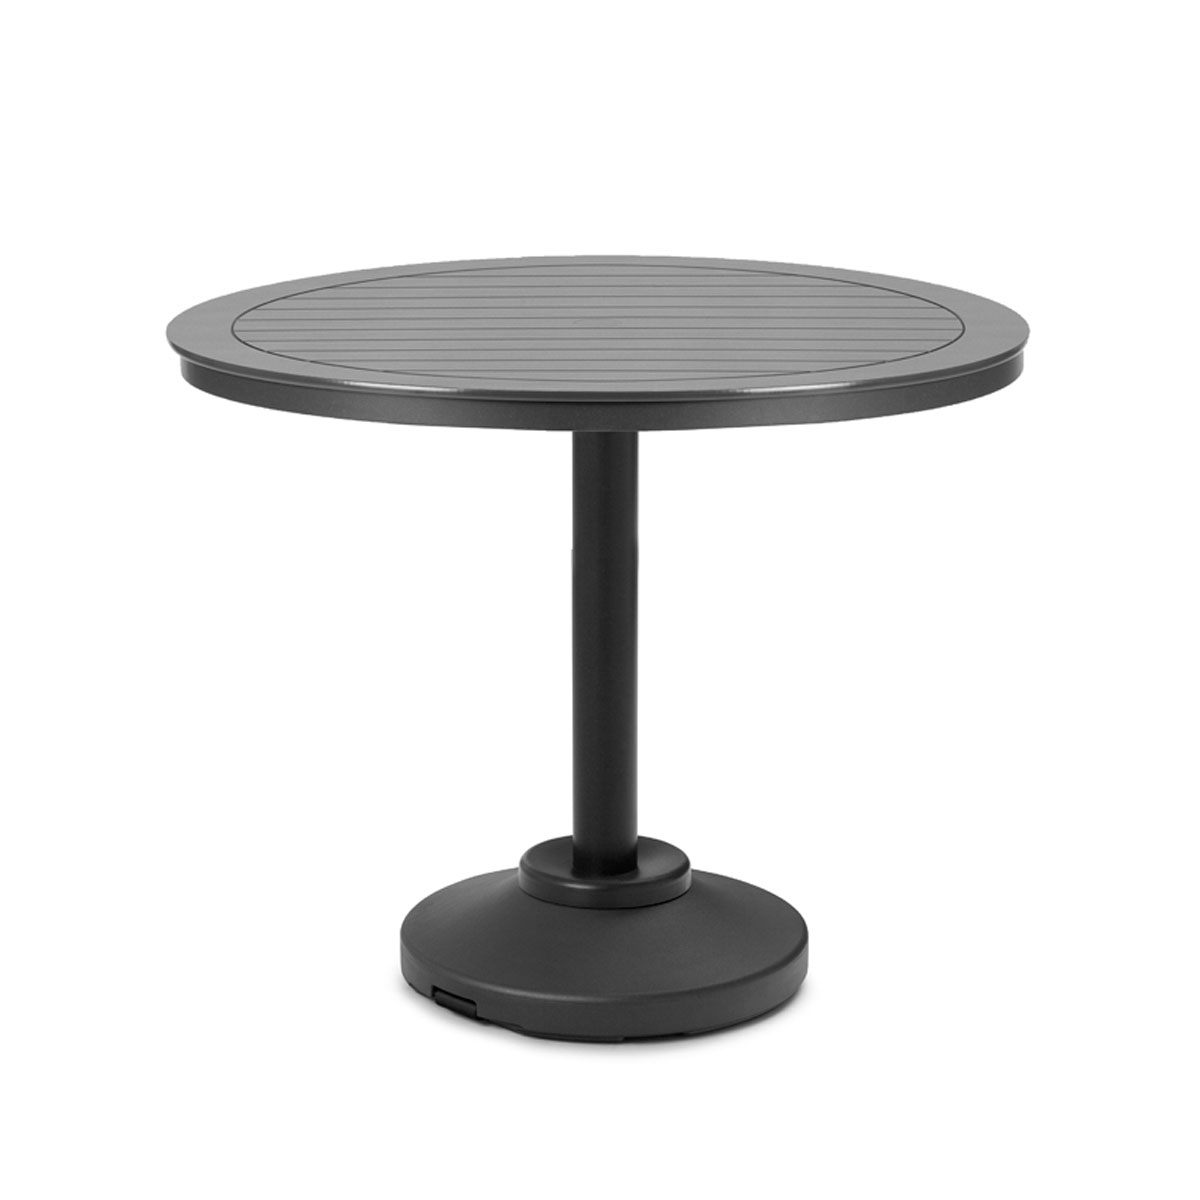 42" Round Bar Height Table with 80lb Pedestal Base